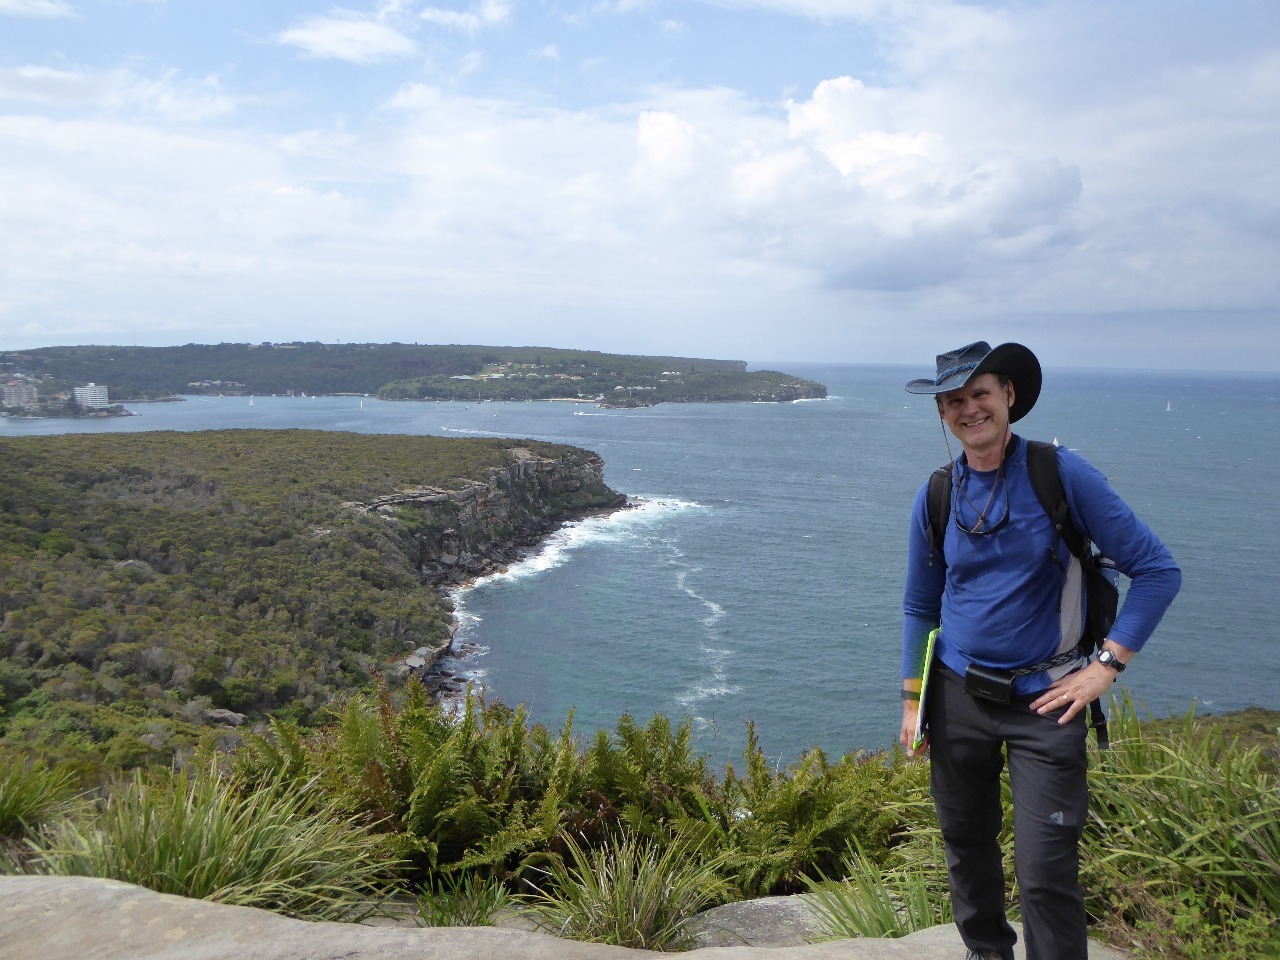 Dan overlooking Manly Cove